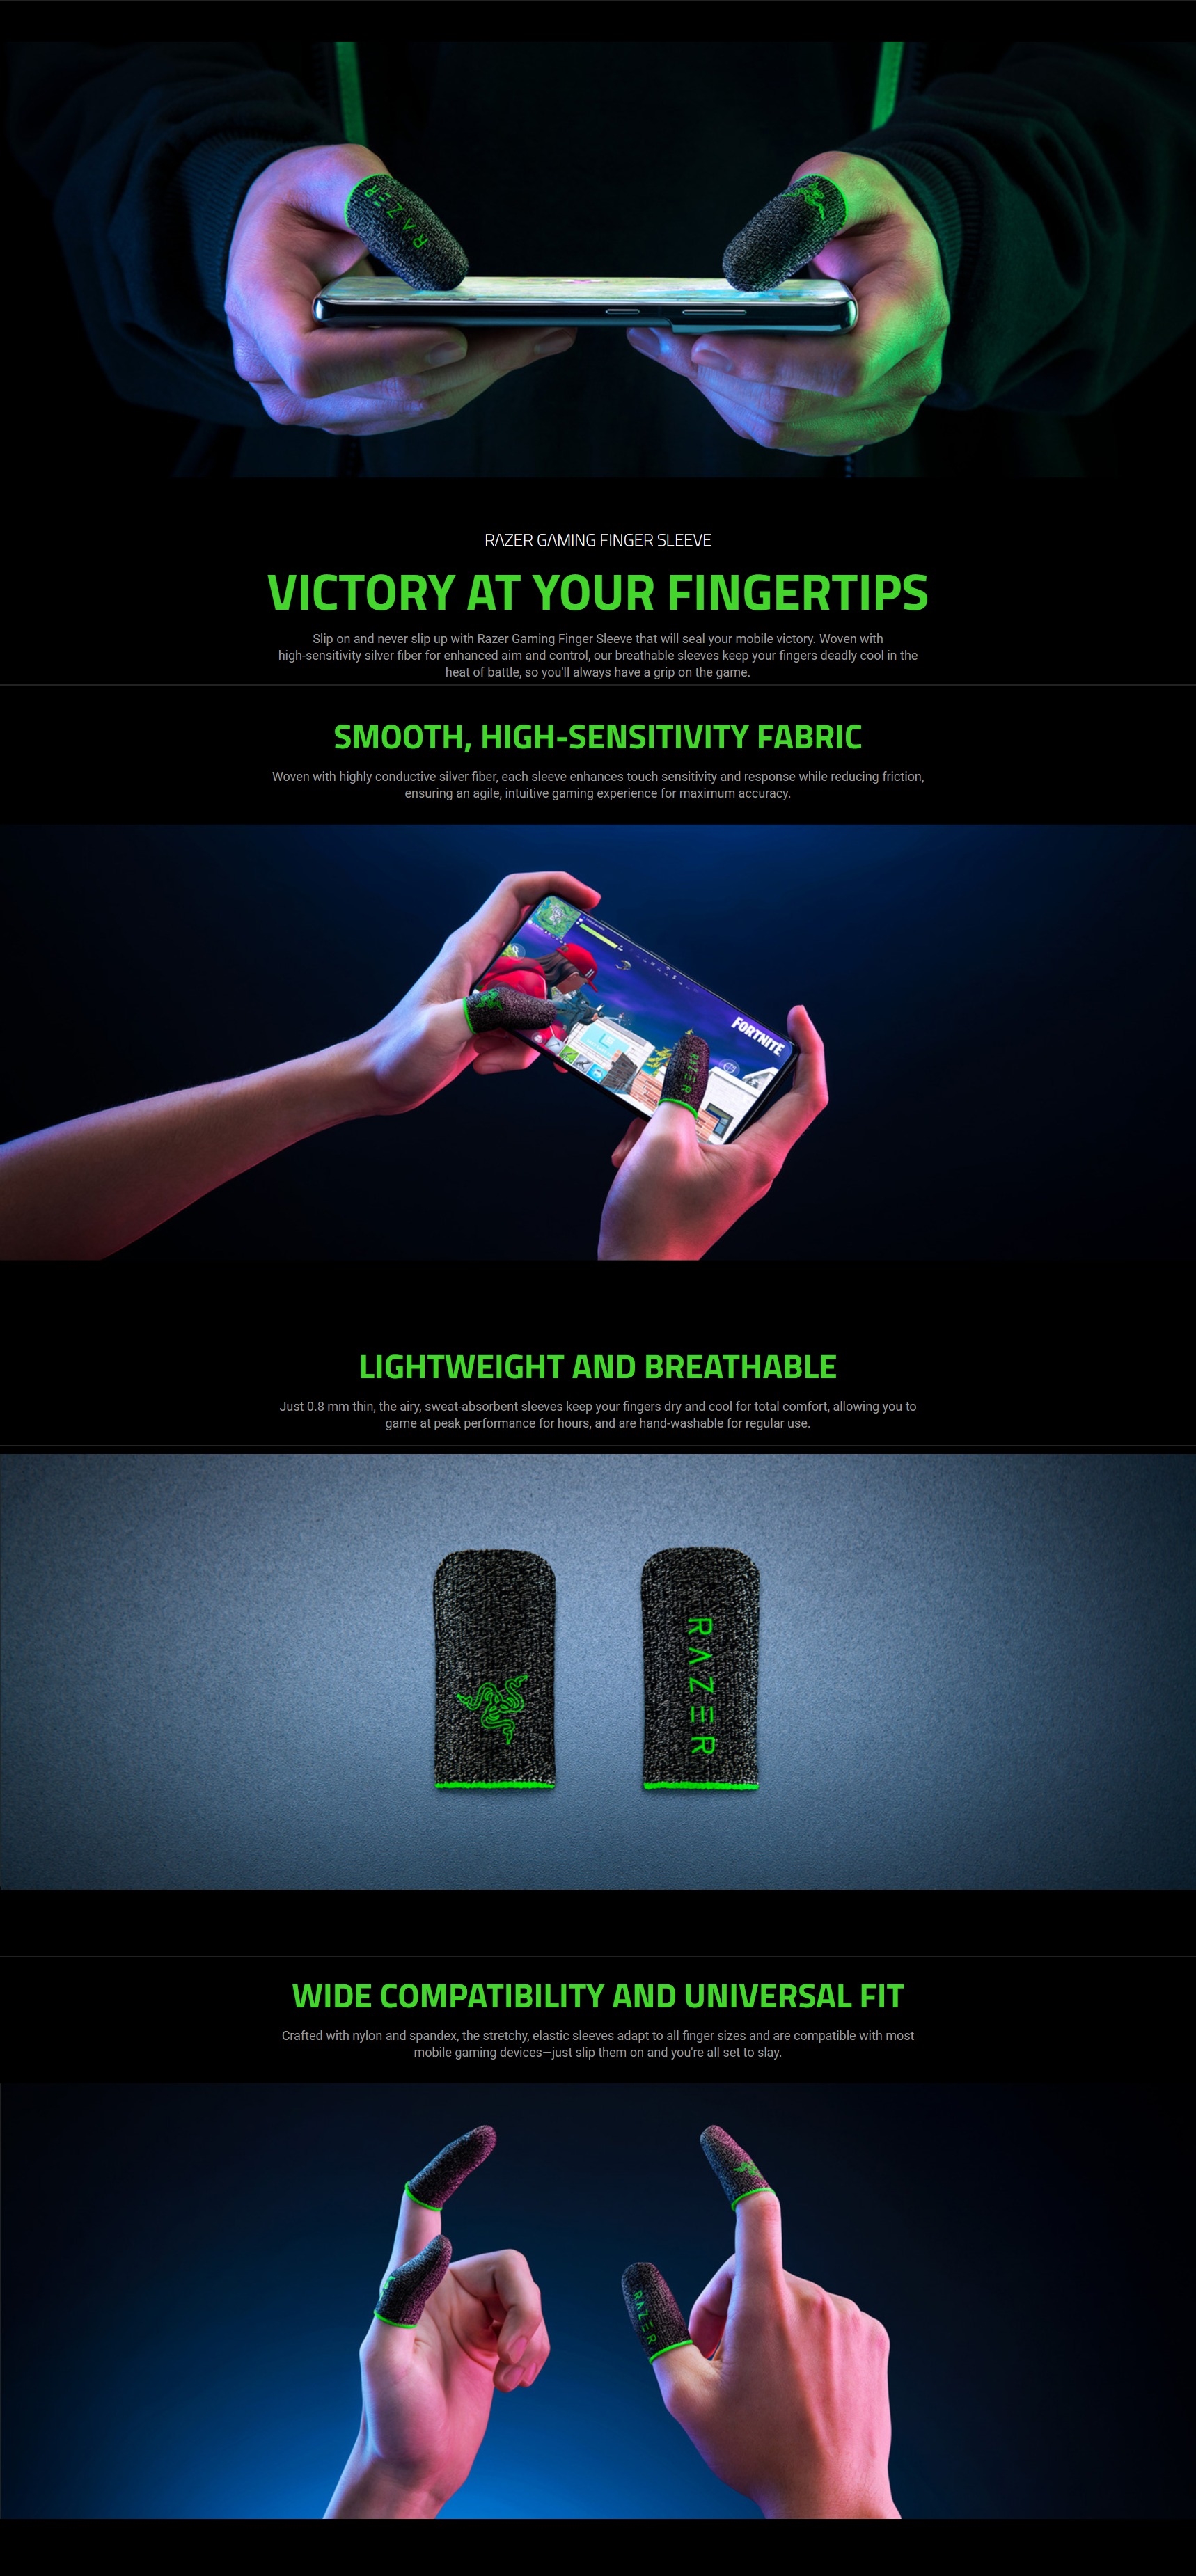 A large marketing image providing additional information about the product Razer Gaming Finger Sleeves - Additional alt info not provided